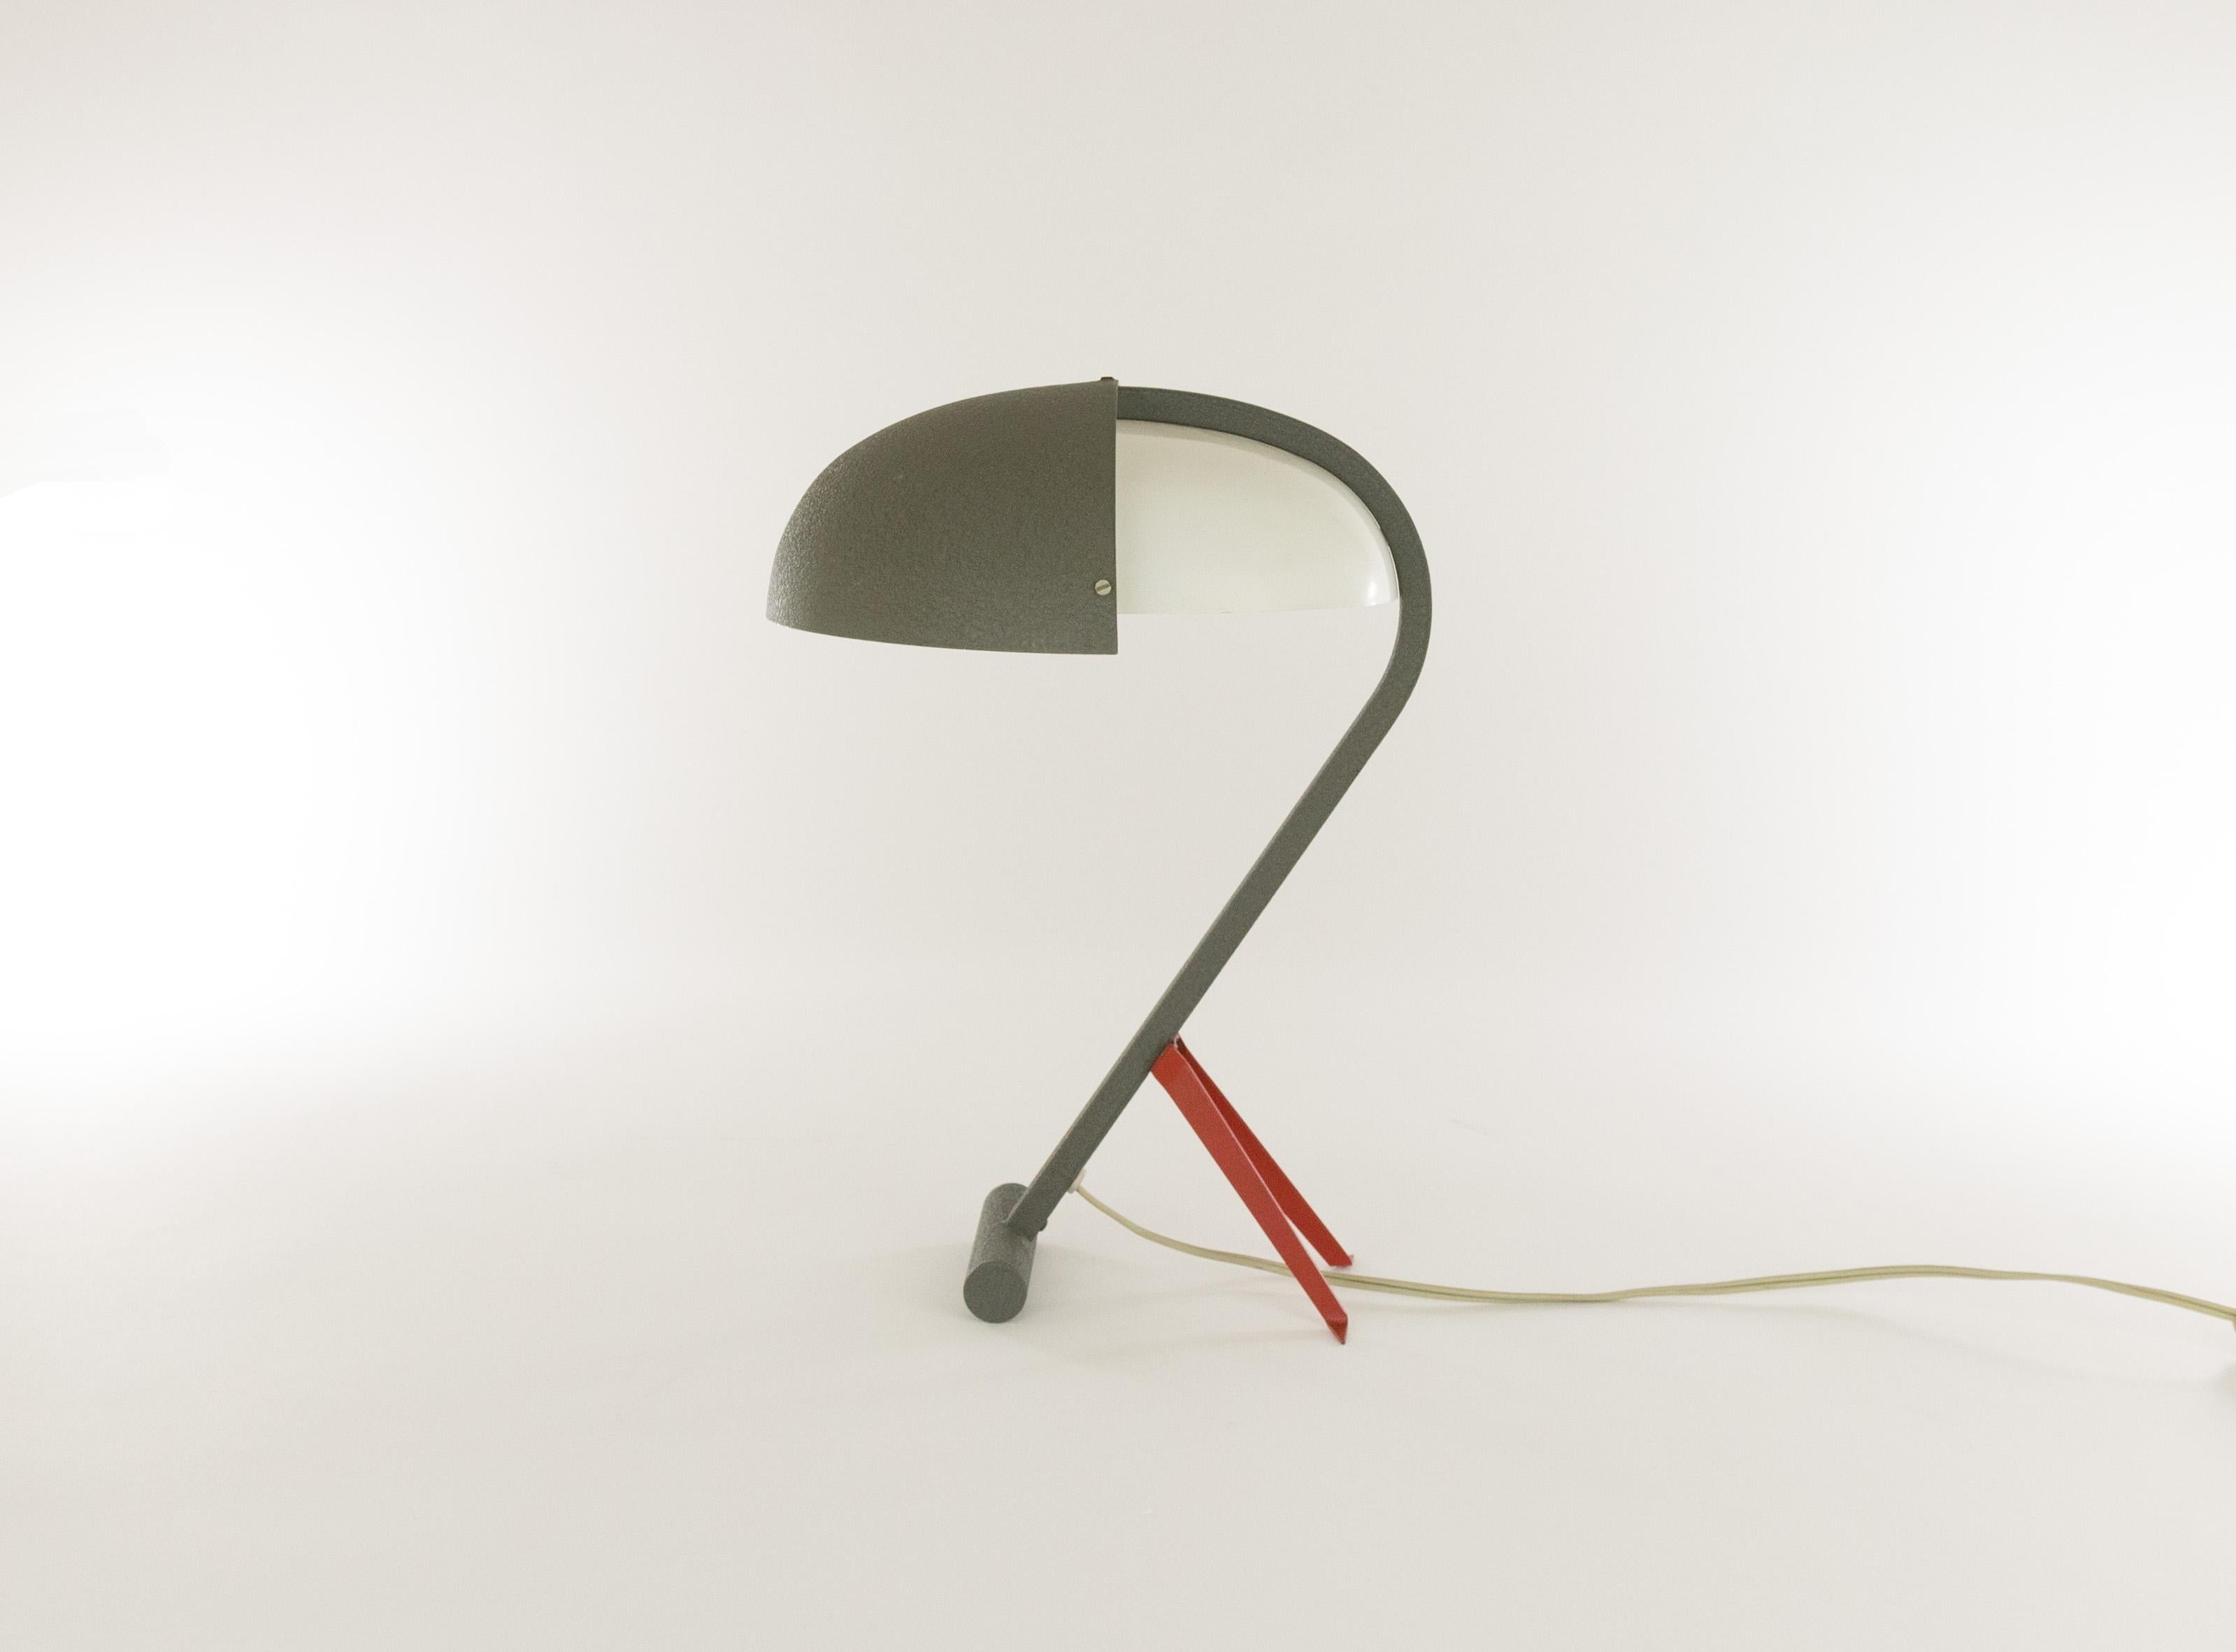 Rare table lamp, Model NX 110, designed by Louis Christiaan Kalff for Philips Eindhoven.

It has a grey steel frame; the shade is made of the same material and white painted metal. The little red supporting legs give the lamp a contemporary